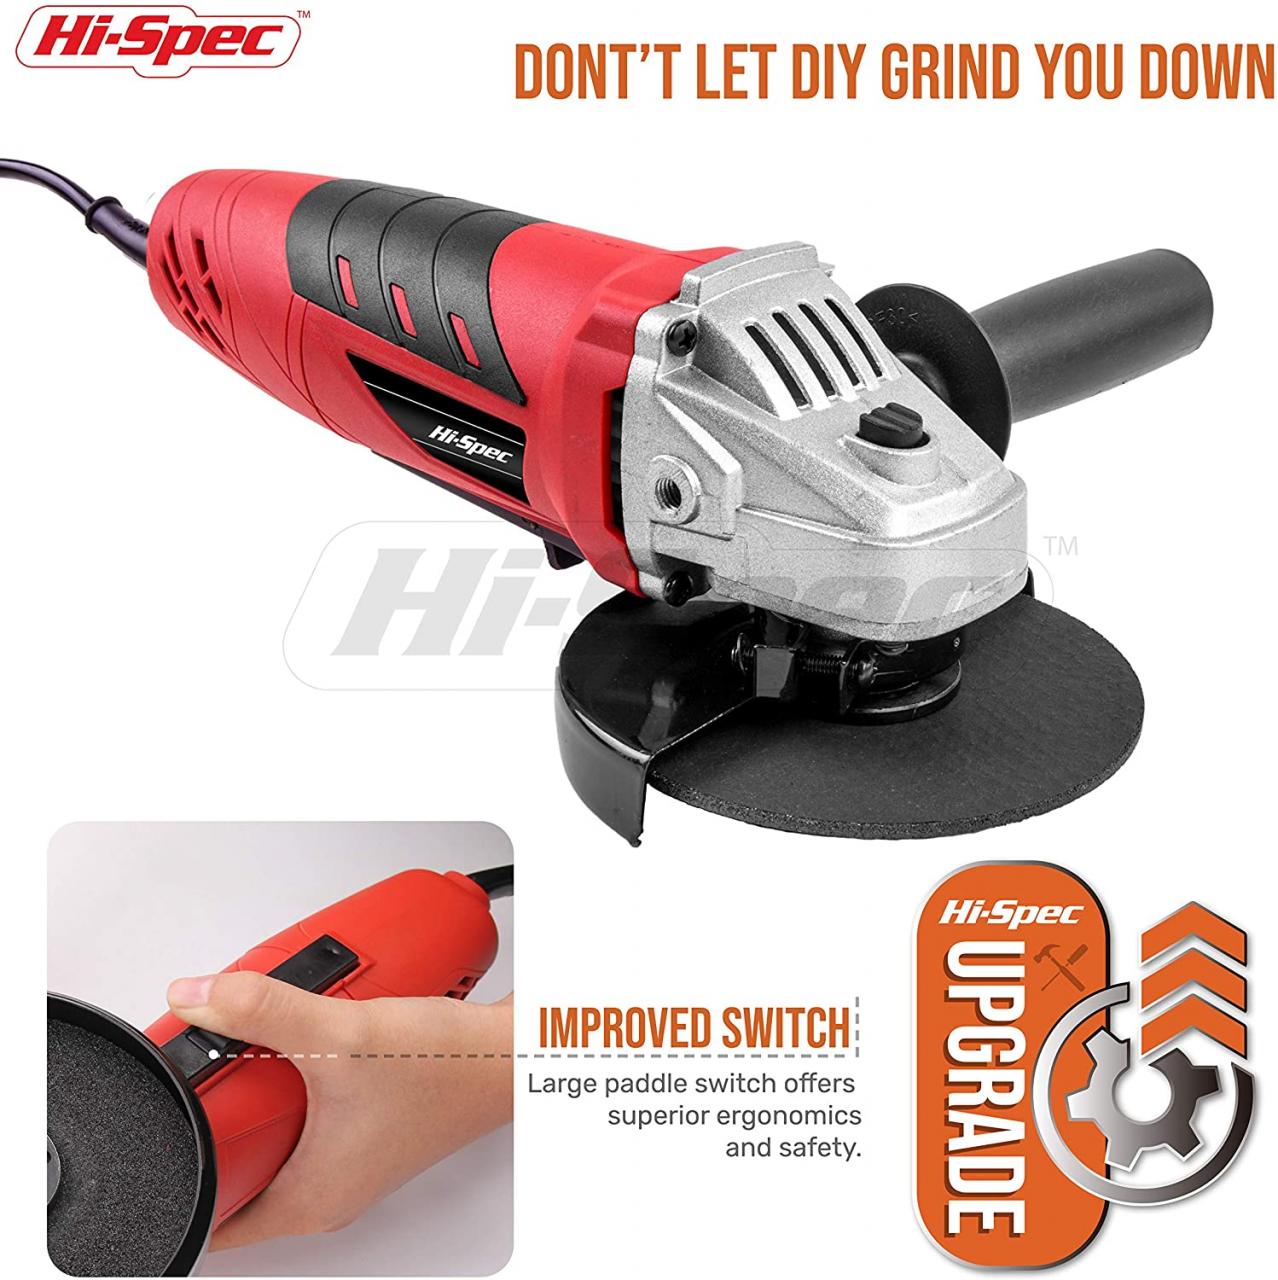 Buy Hi-Spec 500W 5A Corded Mini Angle Side Grinder with 2 Piece Grinding &  Abrasive Cutting Grit Discs, Safety Guard & Support Handle. Suitable for  Metal, Masonry, Mortar, Brick, and Wood DIY